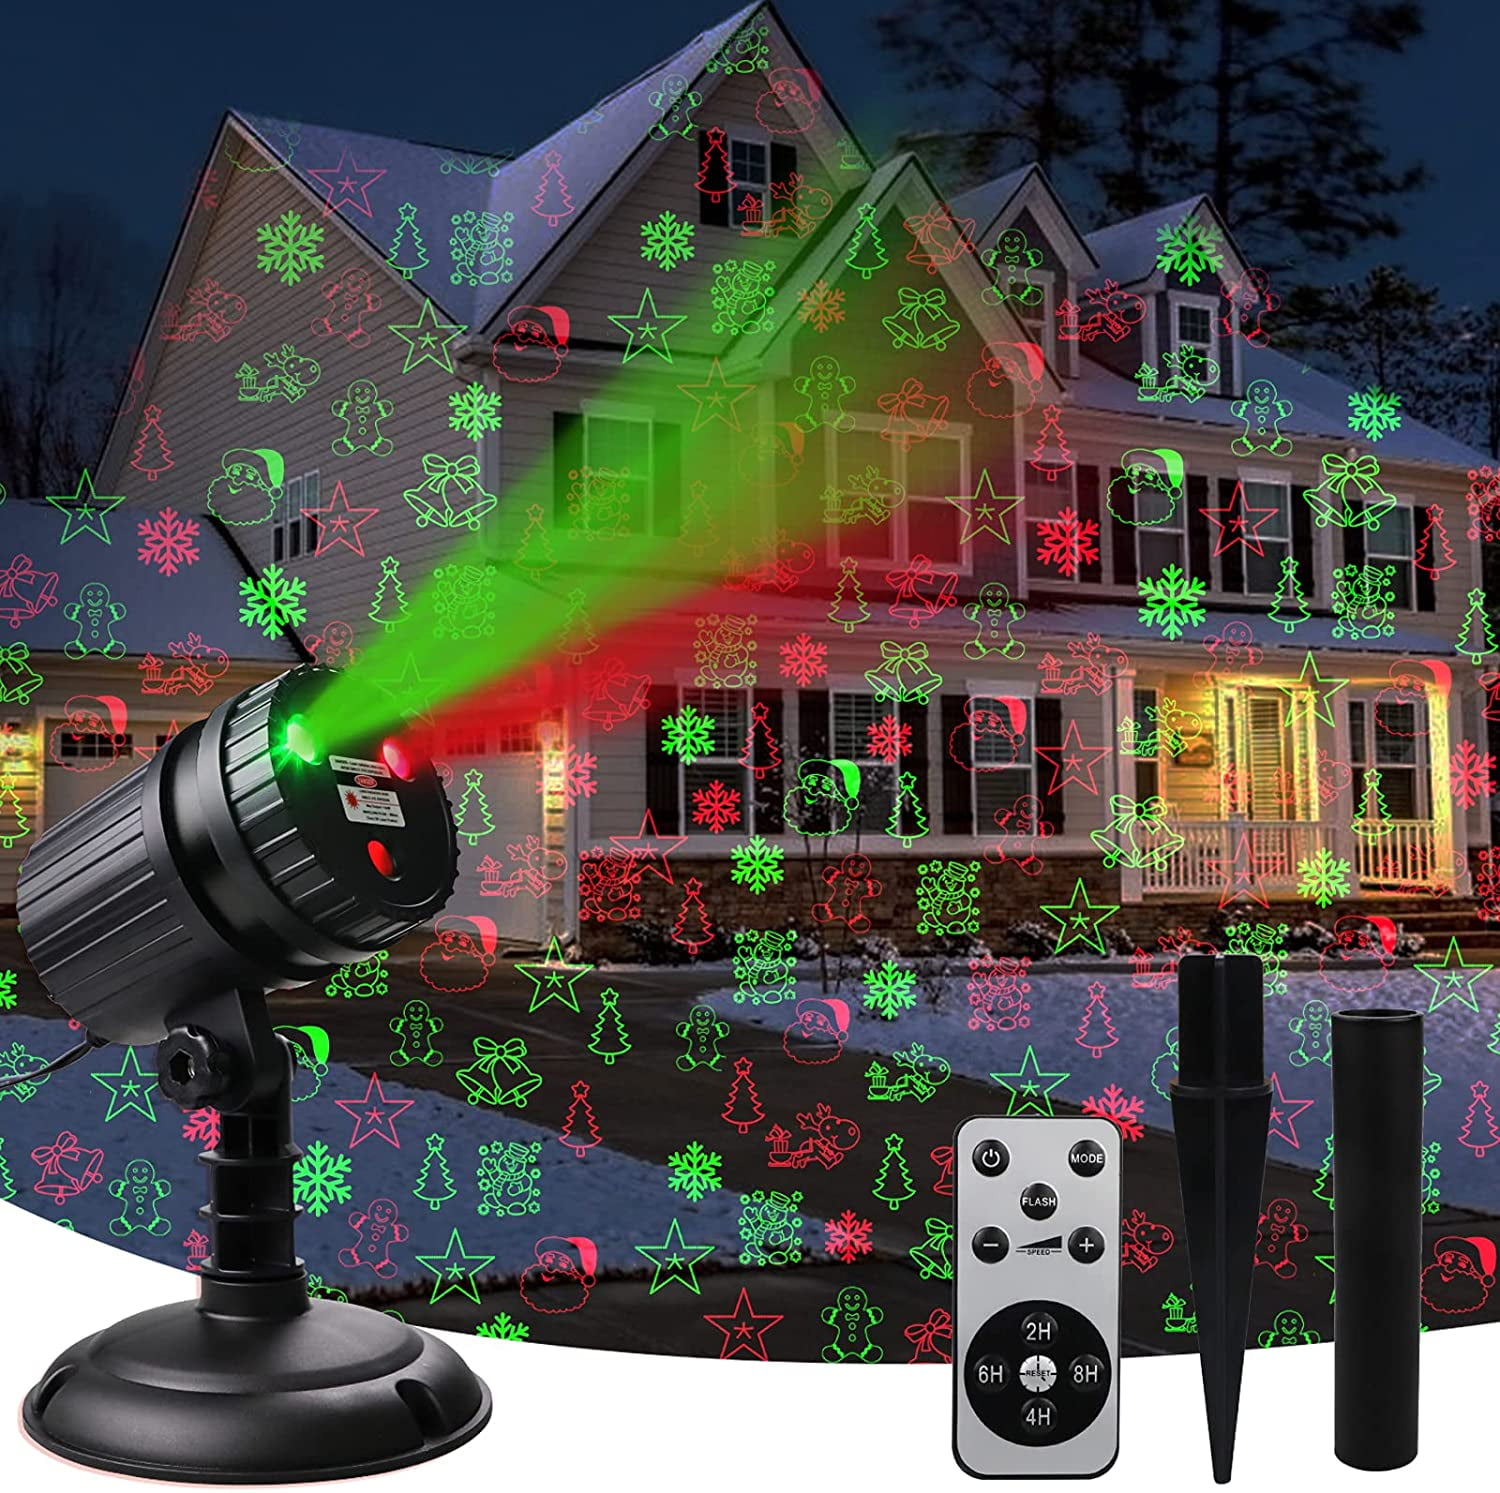 YMING Outdoor Laser Light, Christmas Projector Lights, Laser Star Light with Remote Control, Indoor Outdoor Holiday Decoration, Christmas Gift, Wedding 